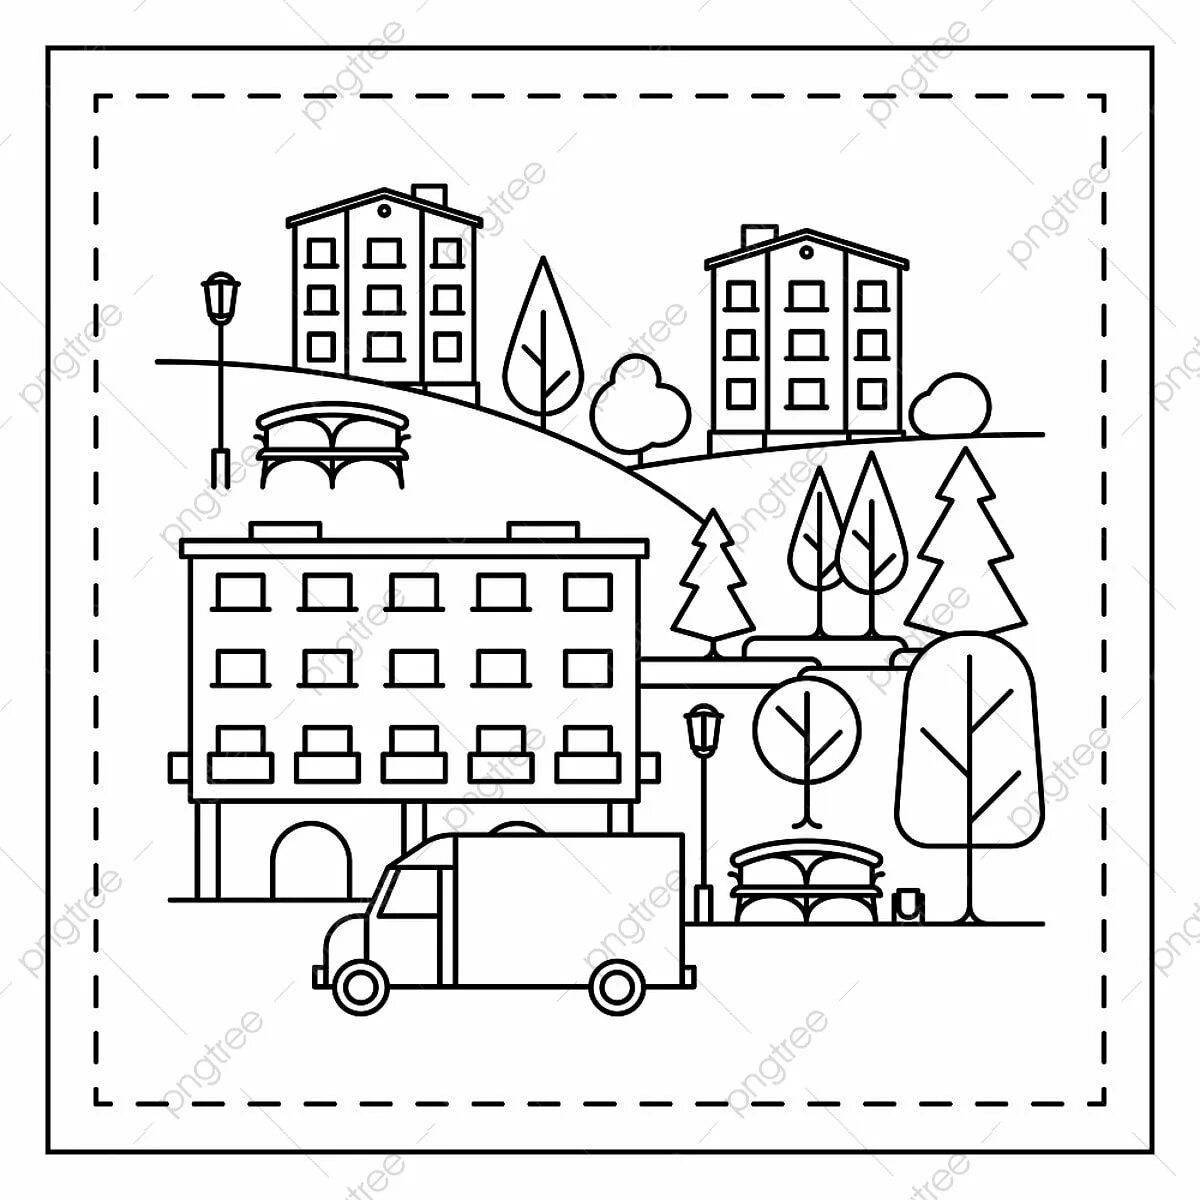 Playful my city coloring page